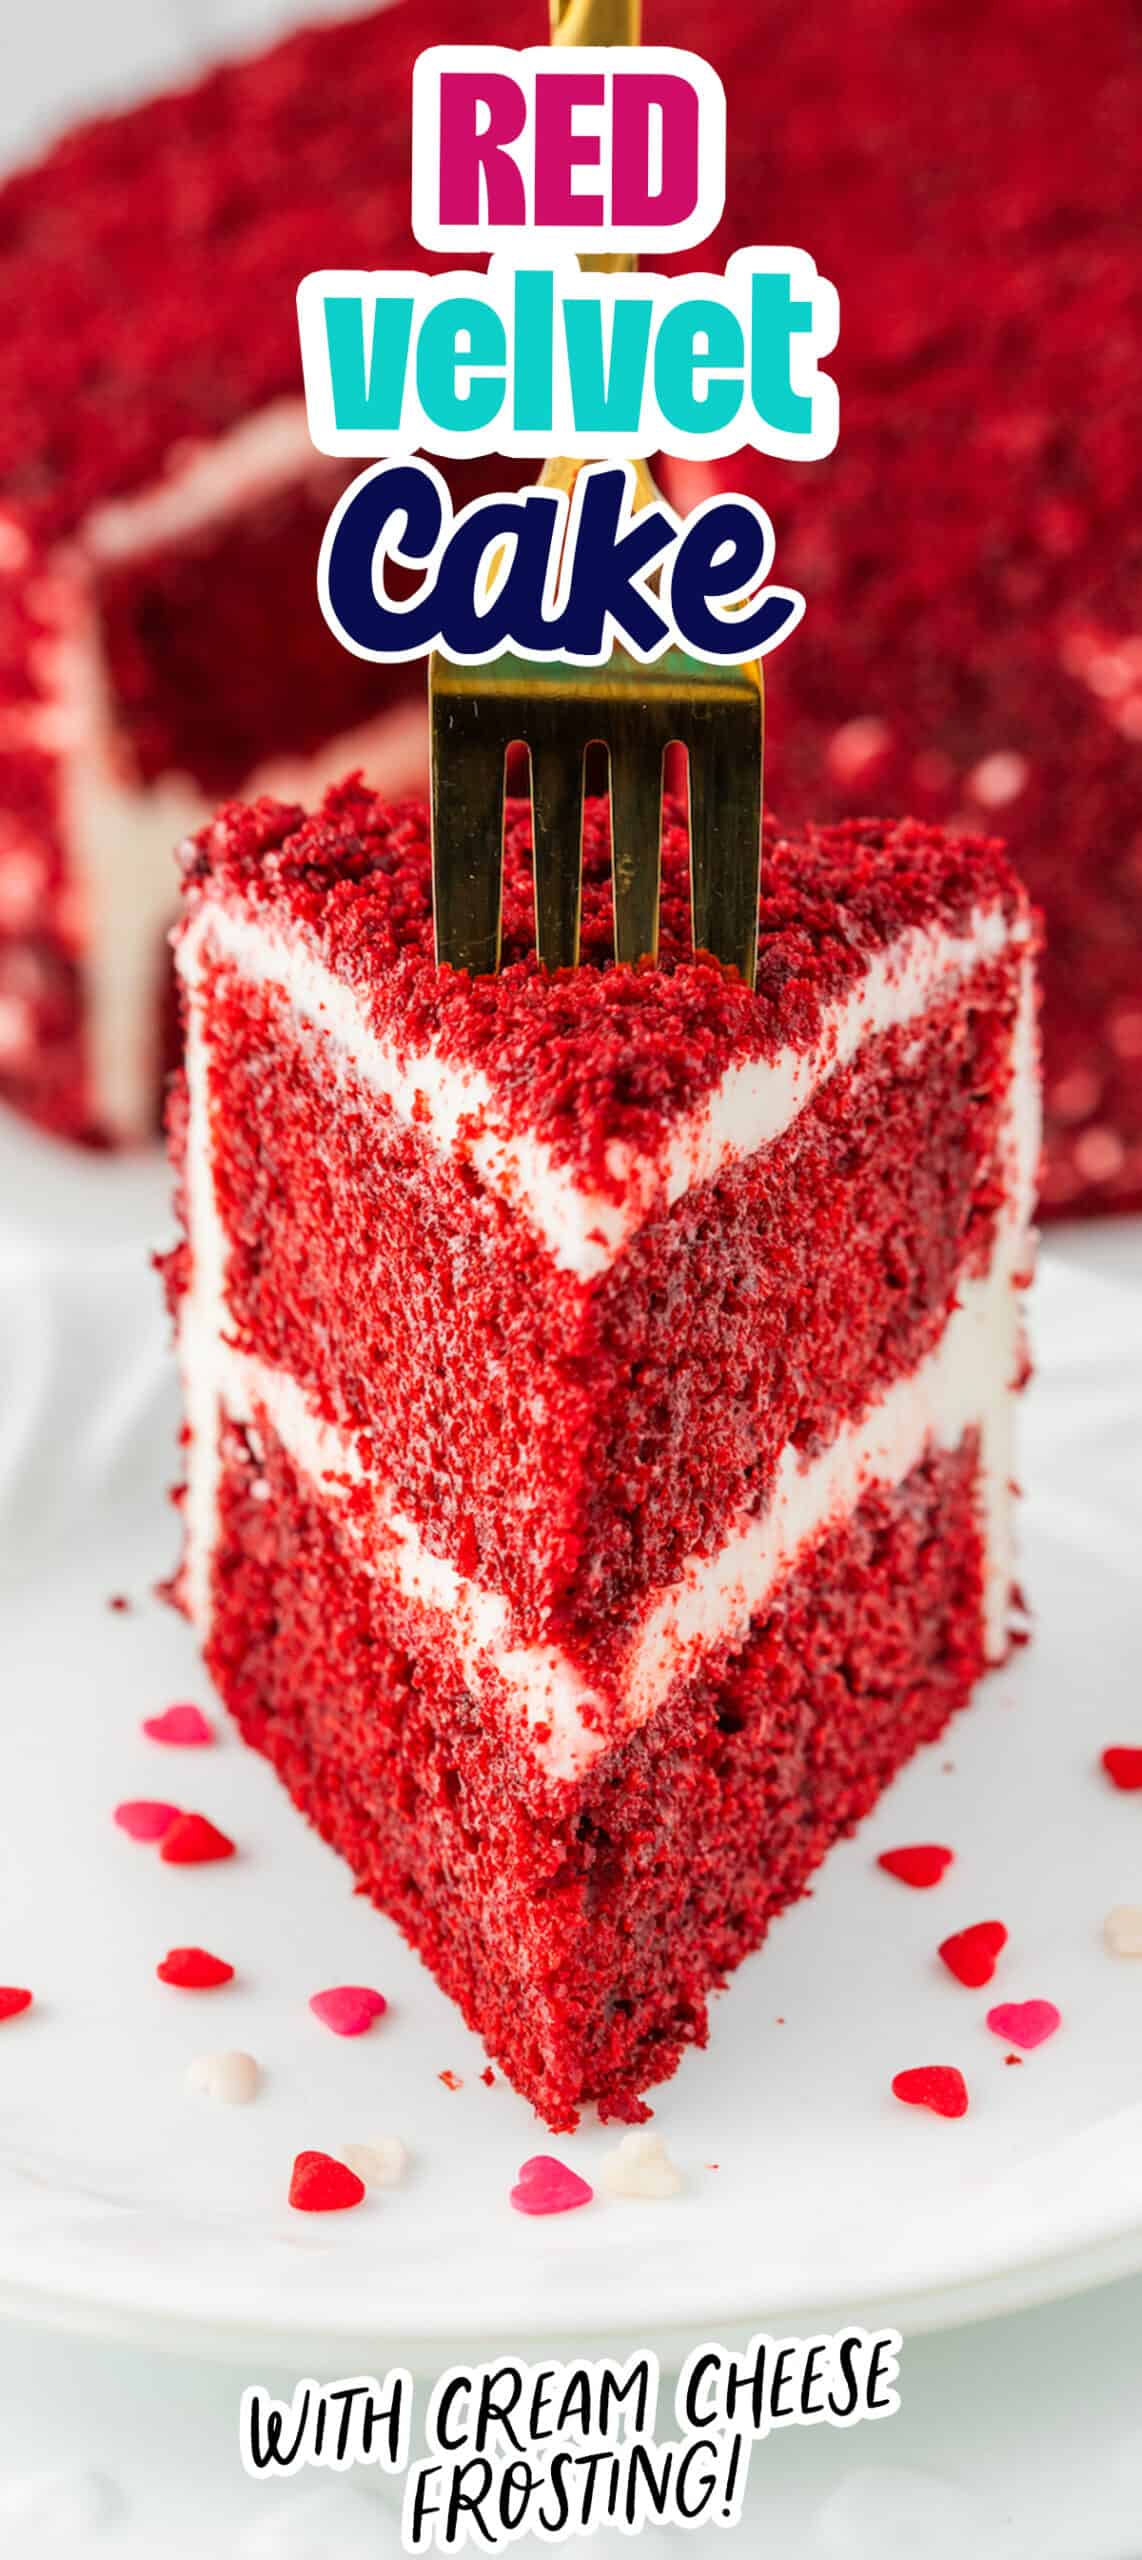 Red velvet cake with cream cheese frosting is a classic dessert that is perfect for any occasion. The rich and velvety texture of the cake pairs perfectly with the smooth and tangy cream cheese frosting.